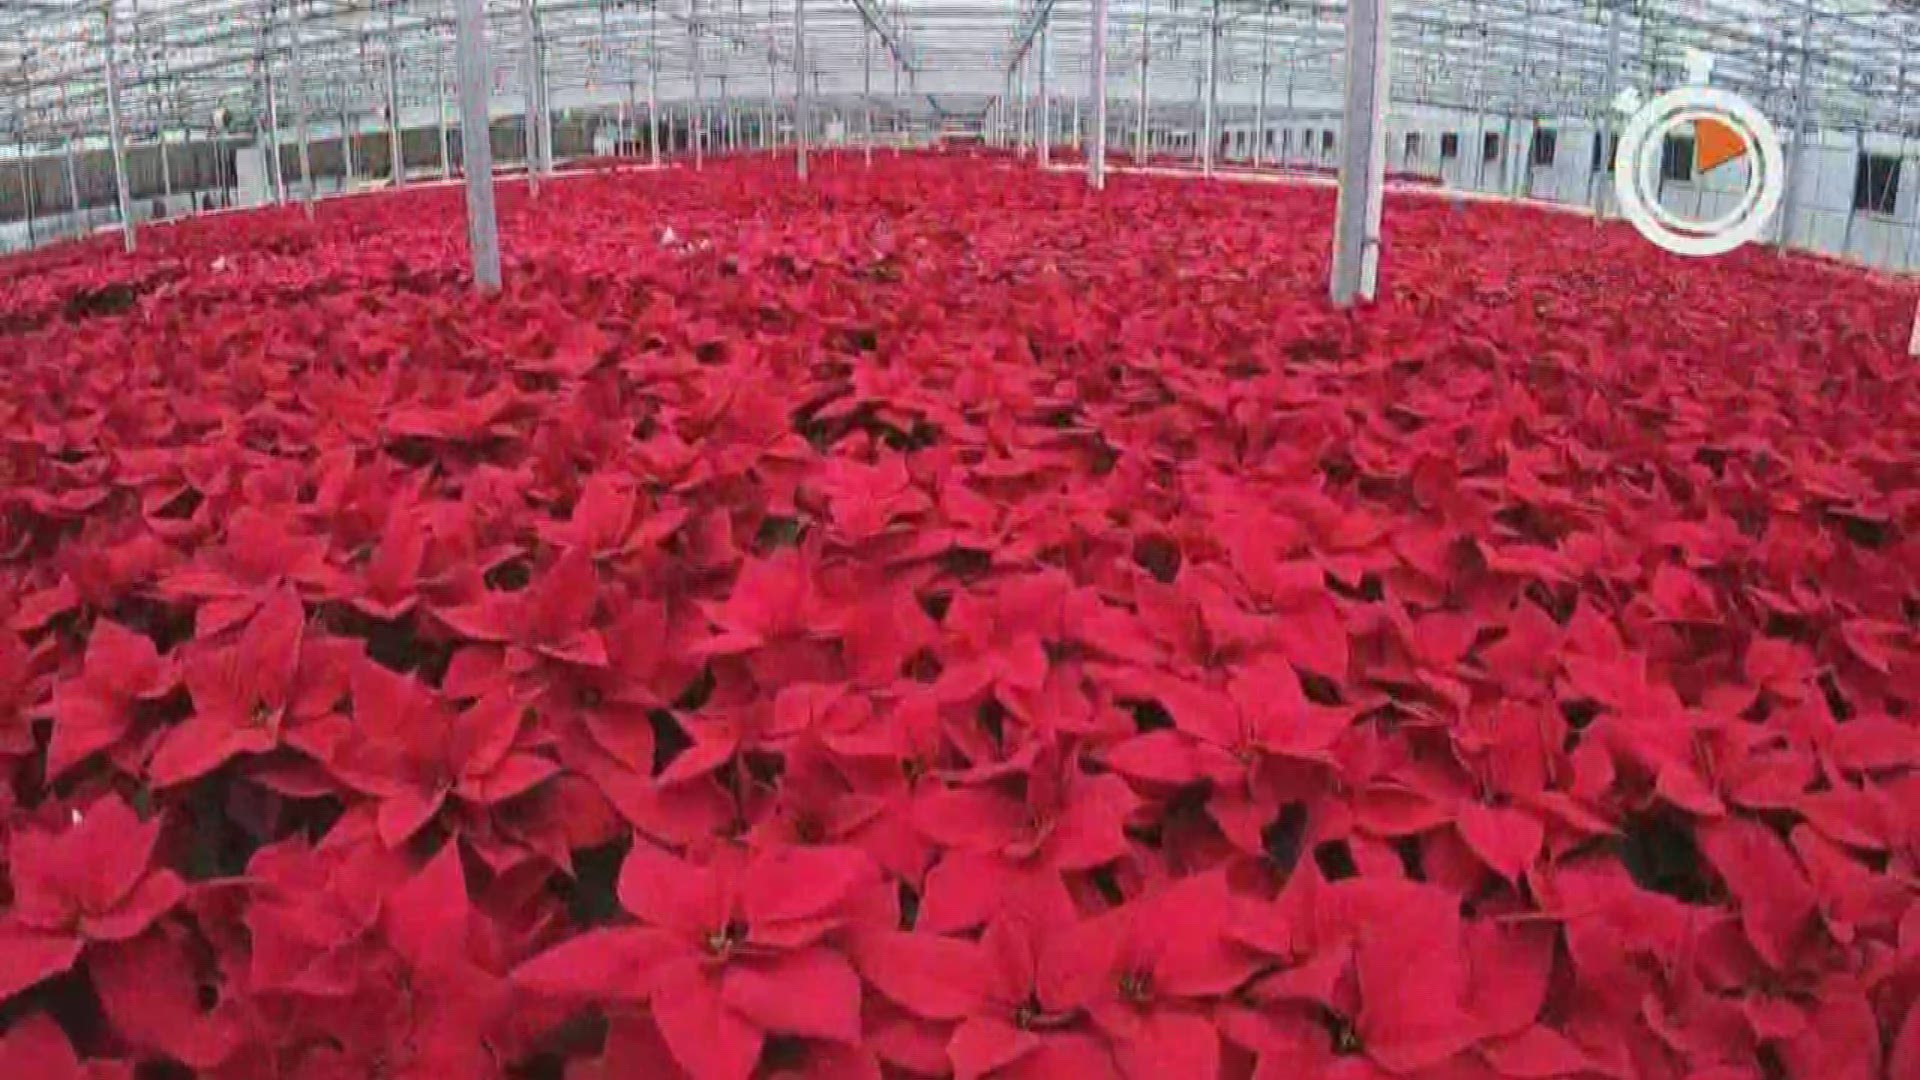 The metro-based home and garden company grew more than 60,000 poinsettias for the Holiday season this year.